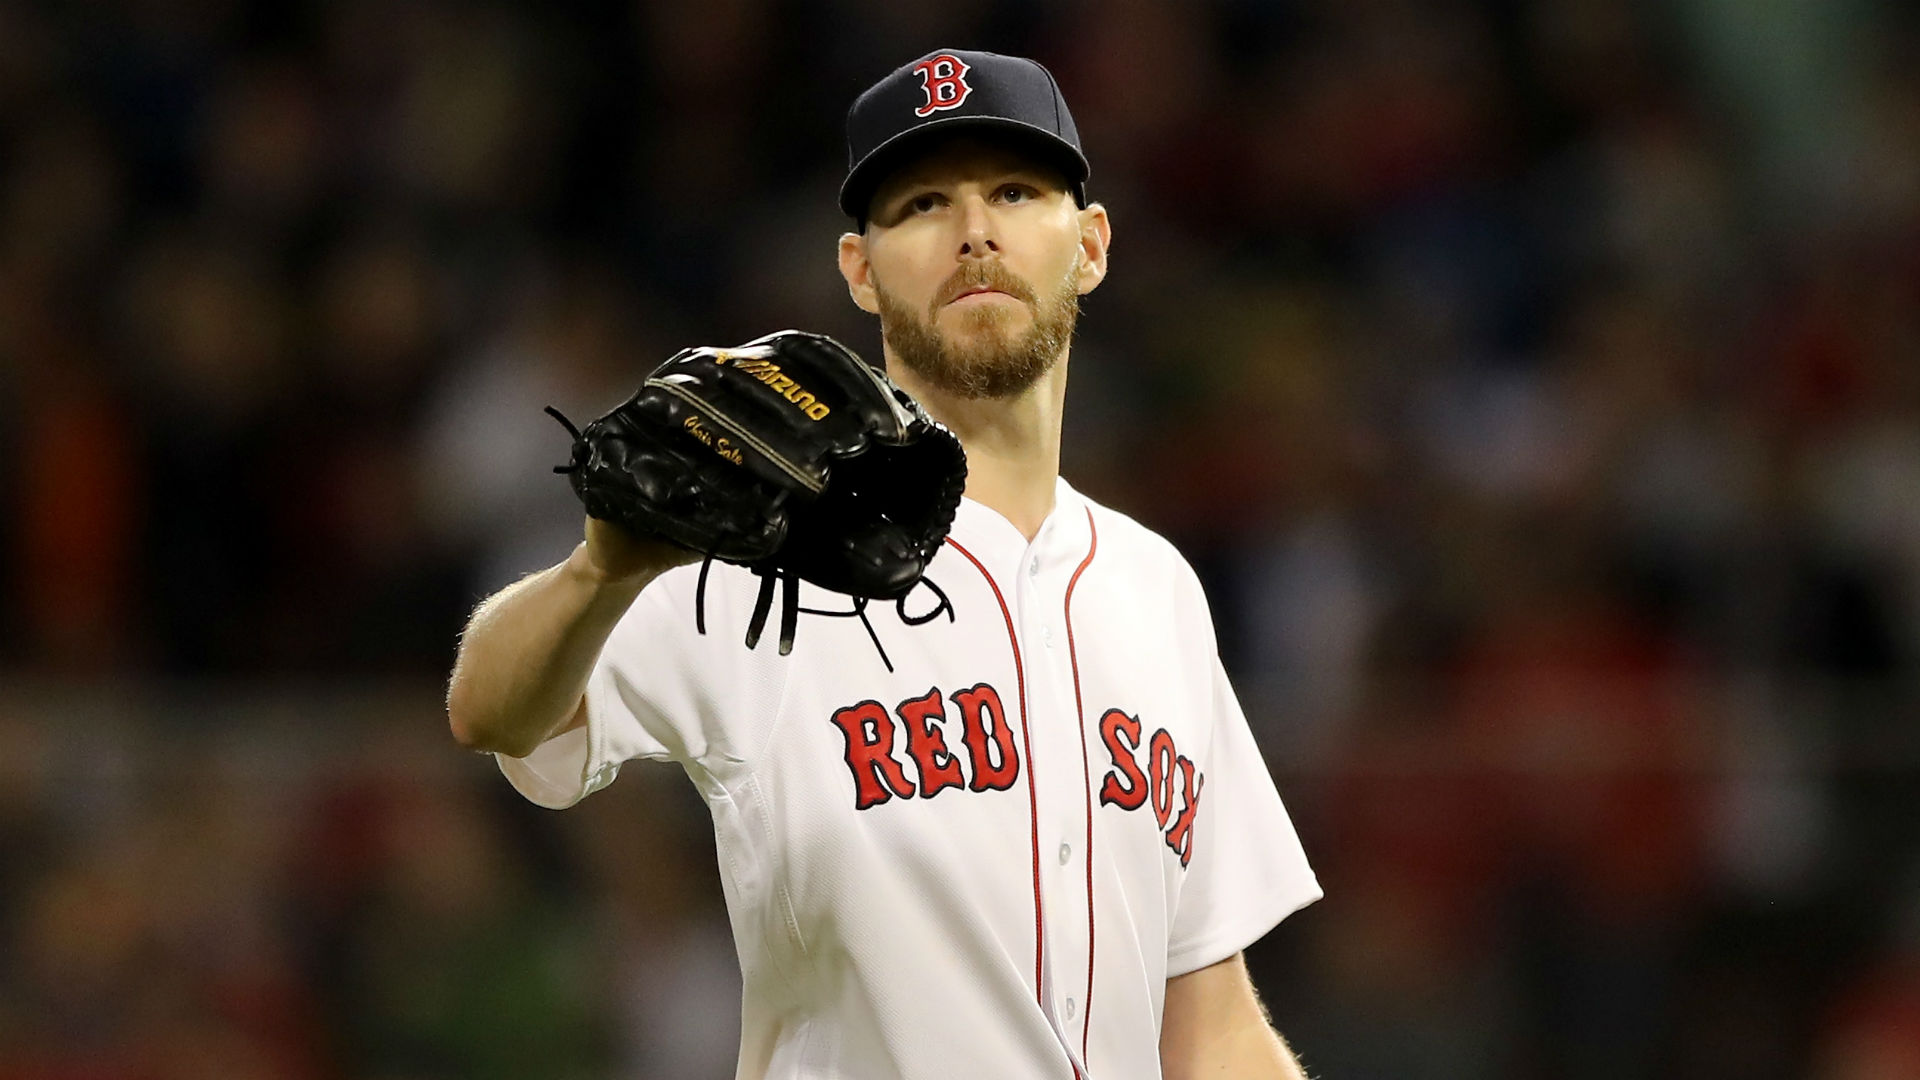 Chris Sale has posted good numbers this season but has seen a noticeable dip in his velocity.